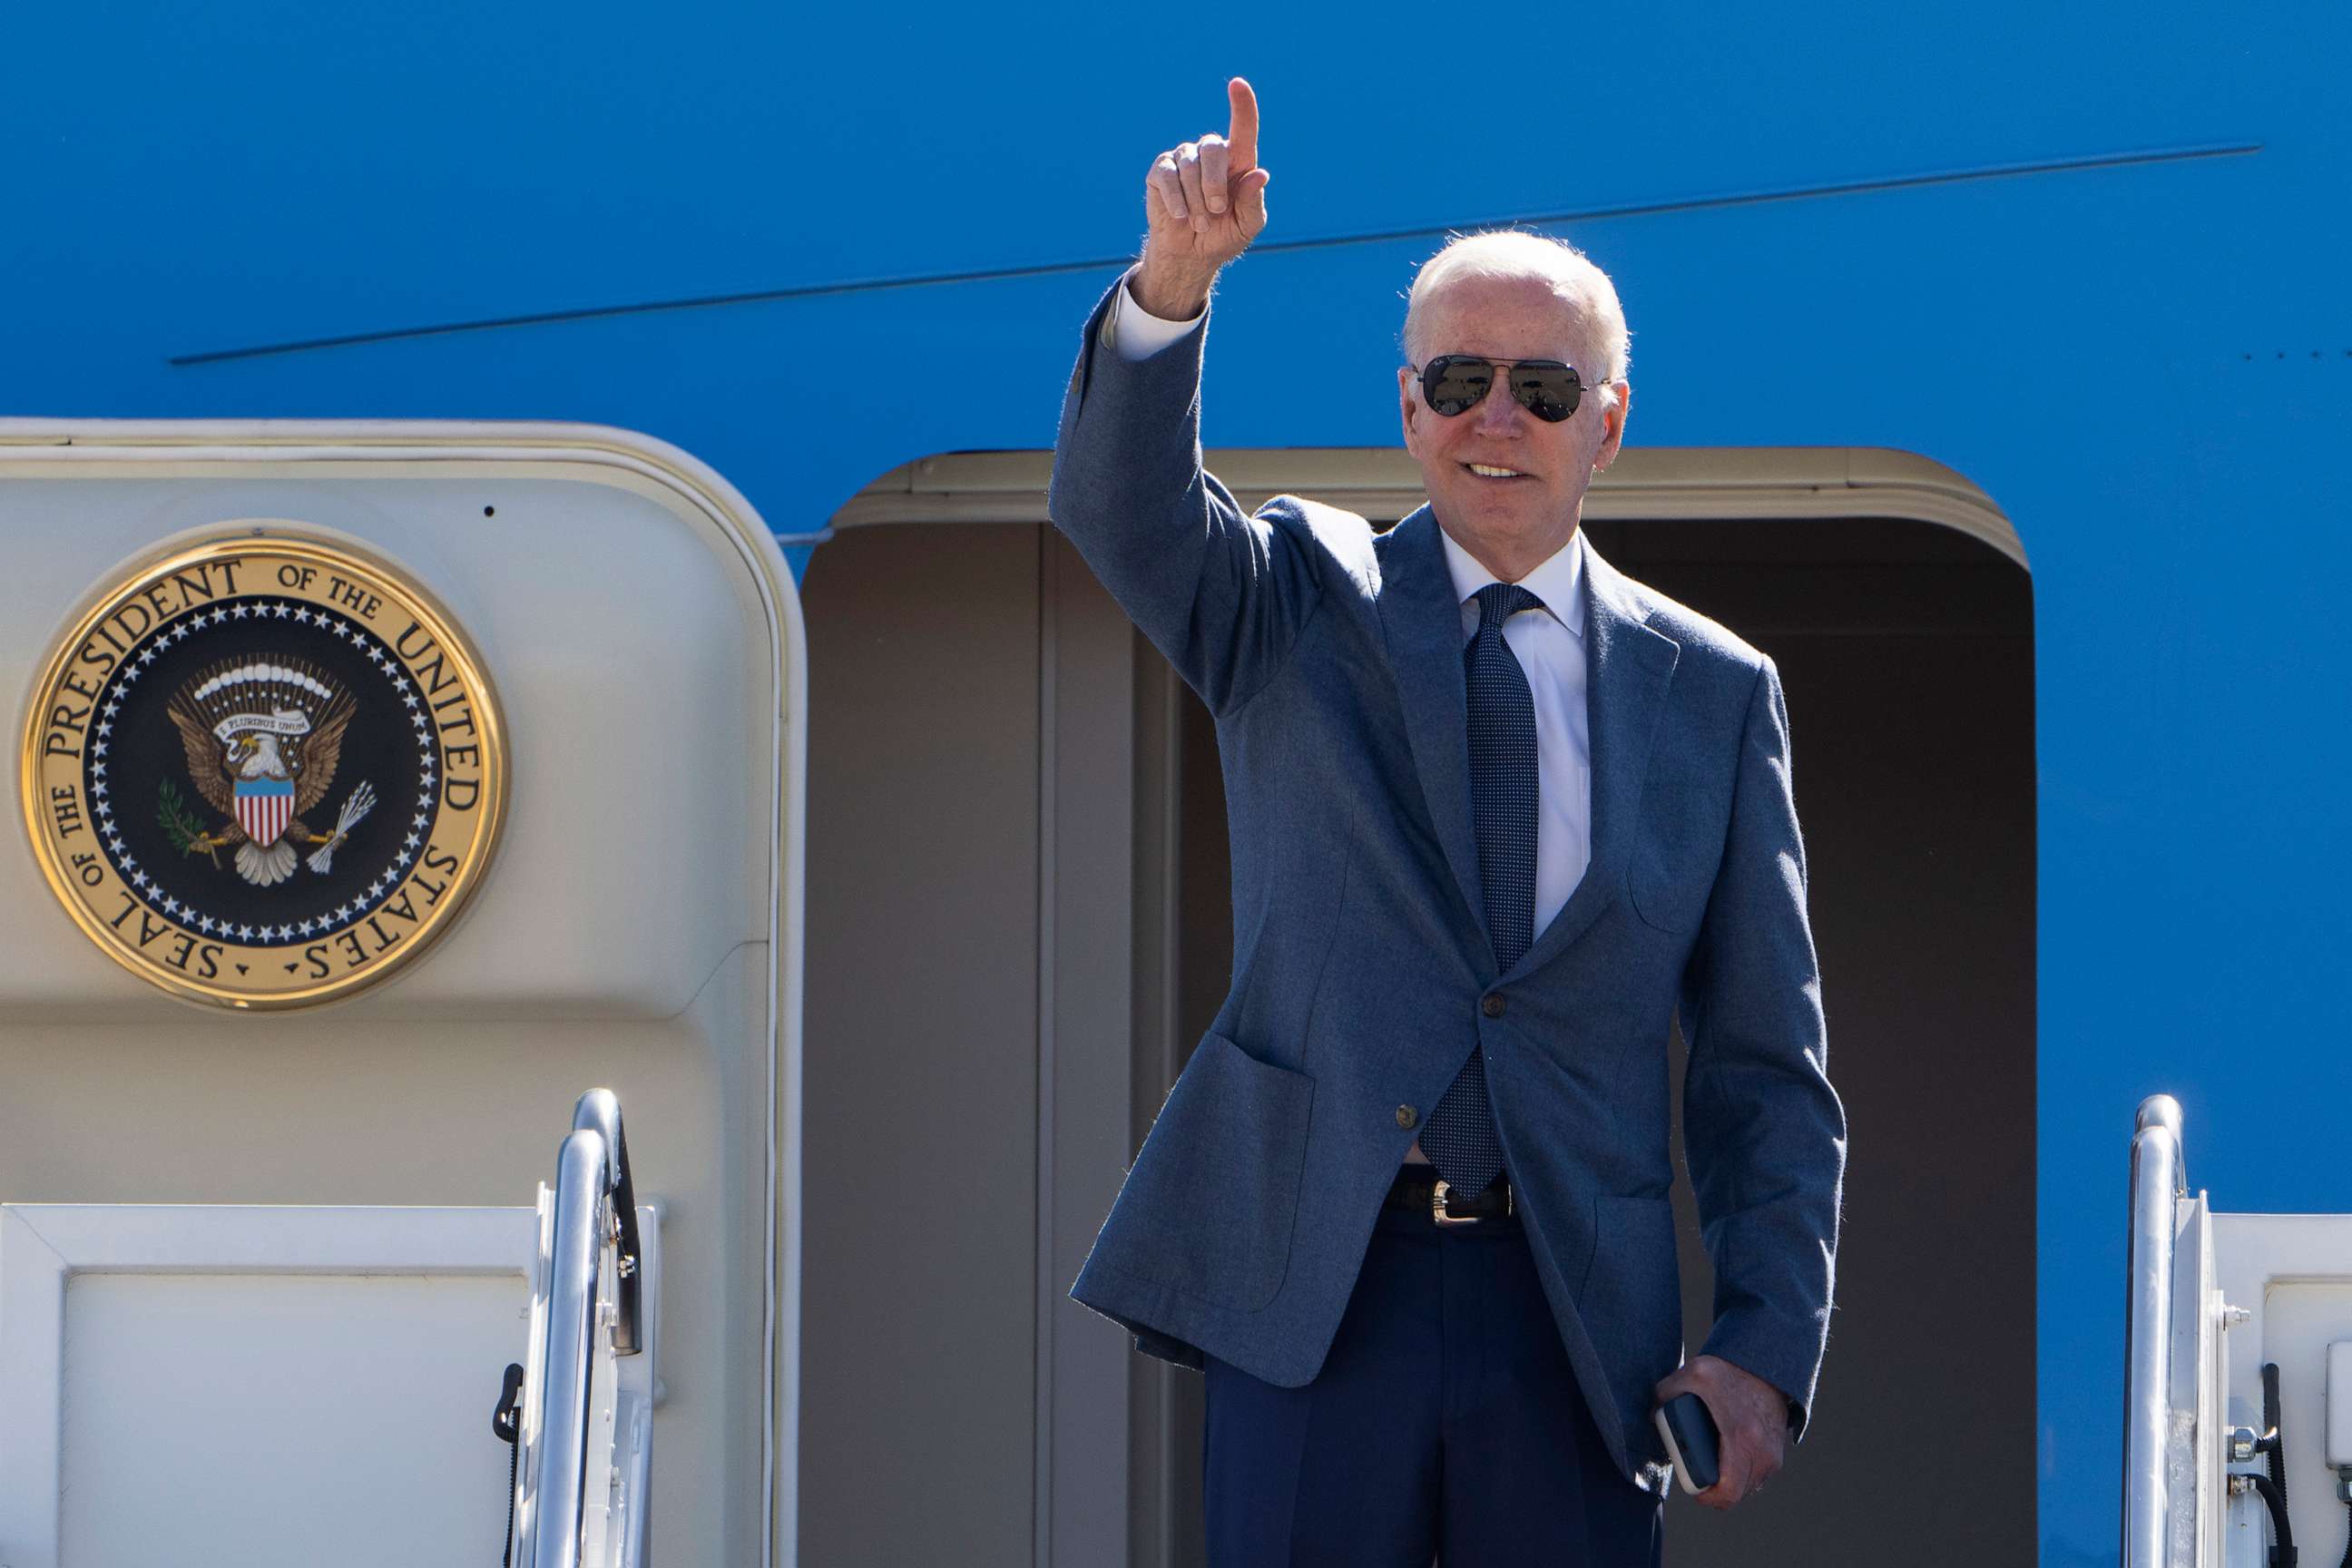 PHOTO: President Joe Biden gestures as he boards Air Force One at Andrews Air Force Base, Md., April 11, 2023.